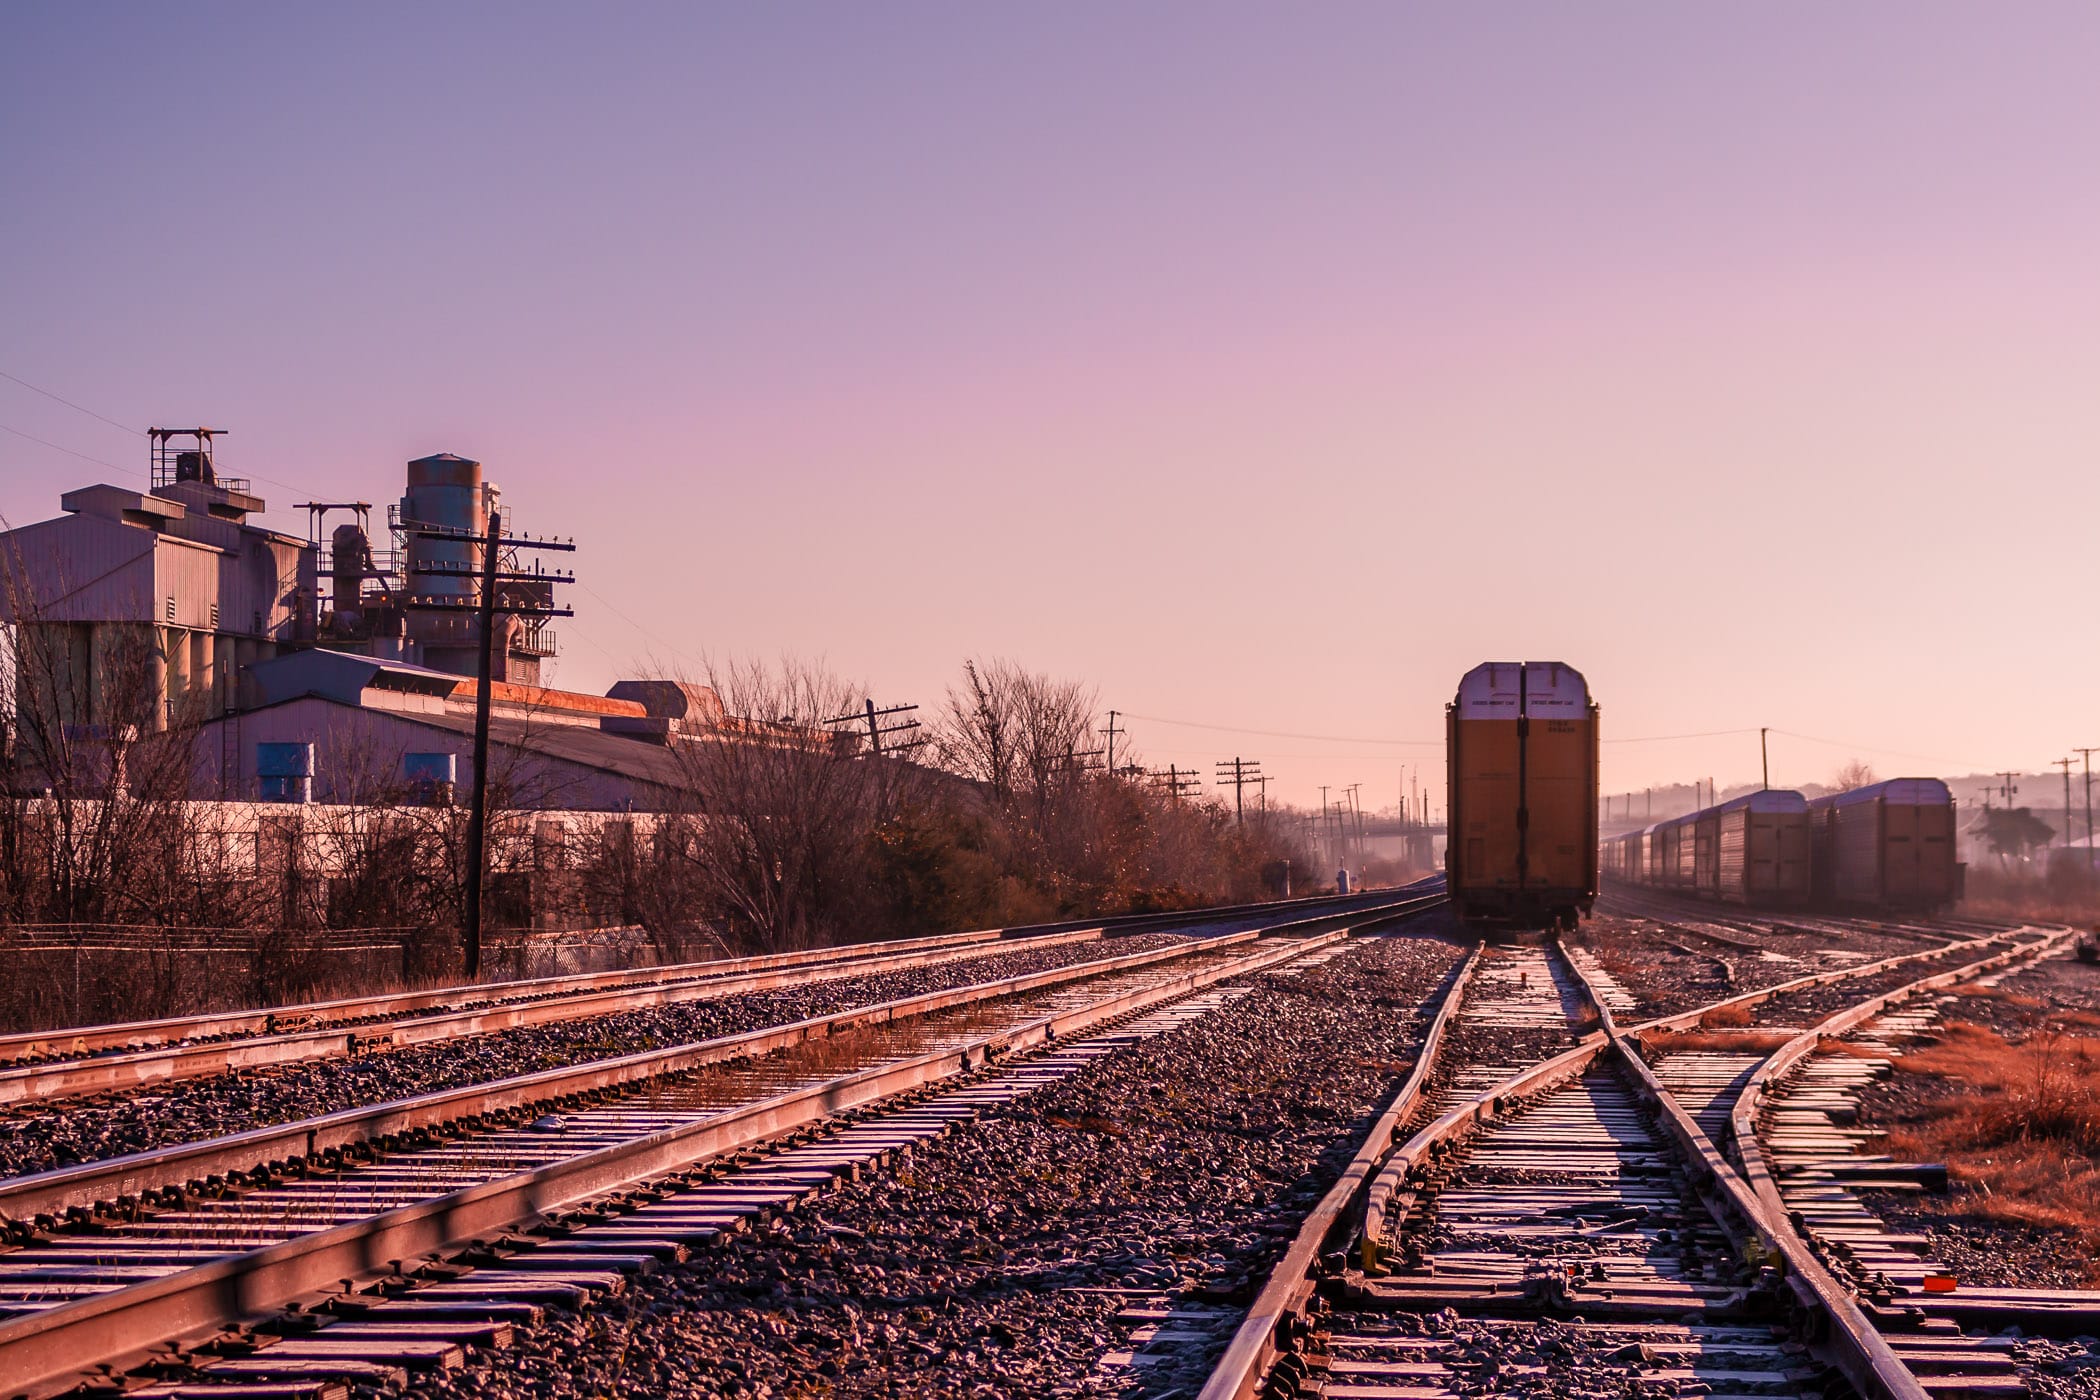 A small railroad switching yard in West Dallas, Texas.